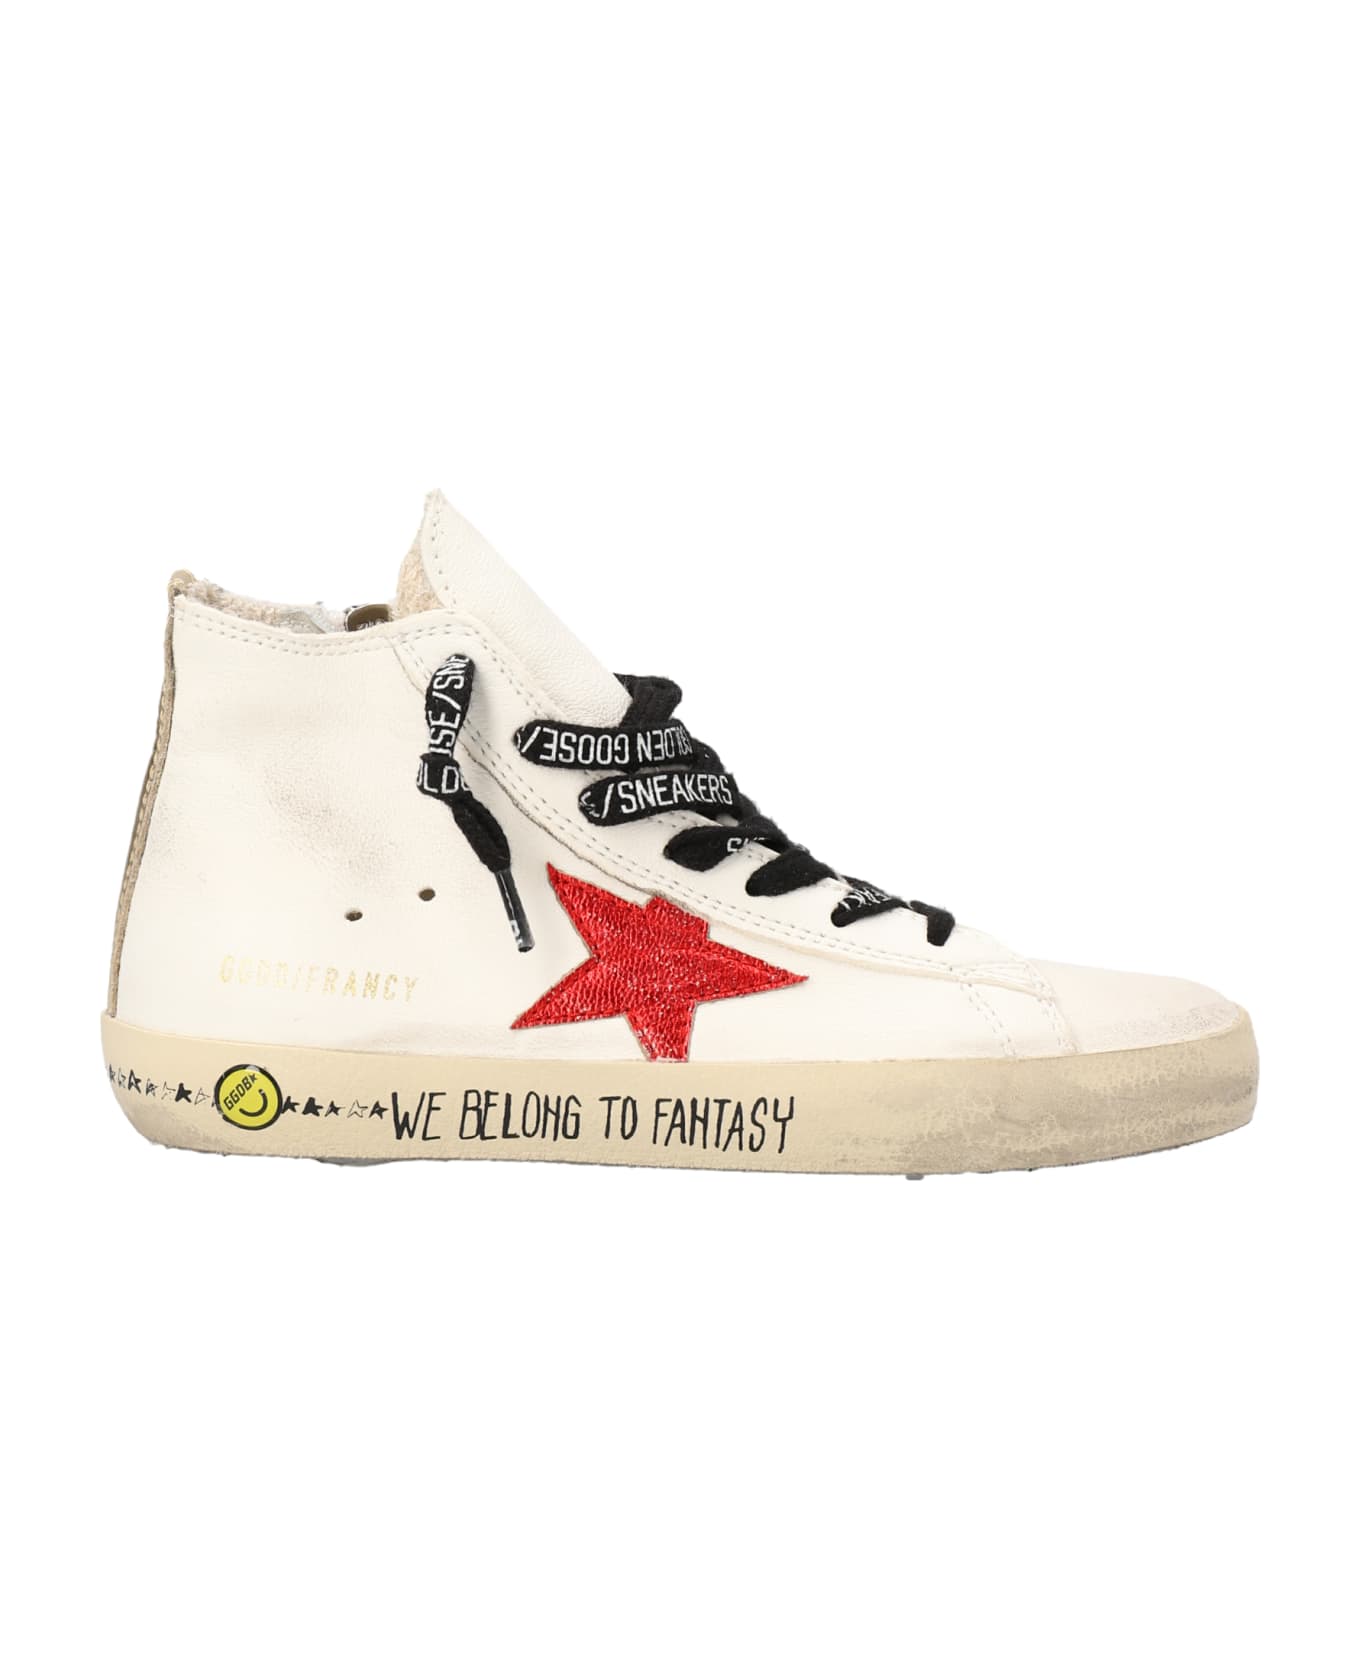 Golden Goose 'francey' Sneakers - White